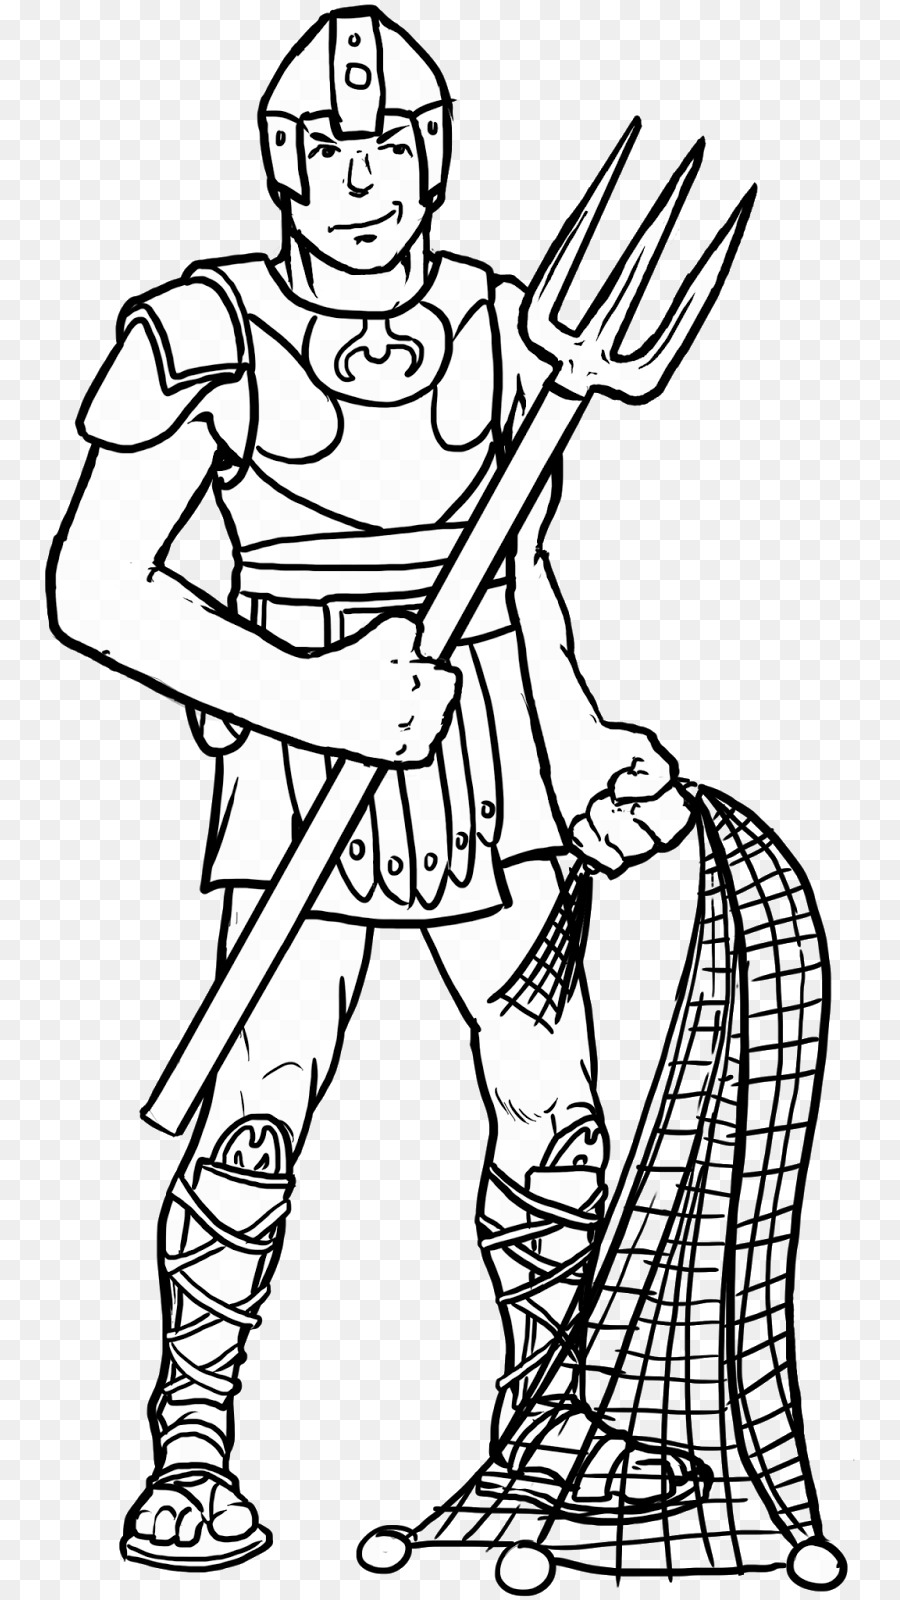 Gladiator Coloring Page at GetColorings.com | Free printable colorings